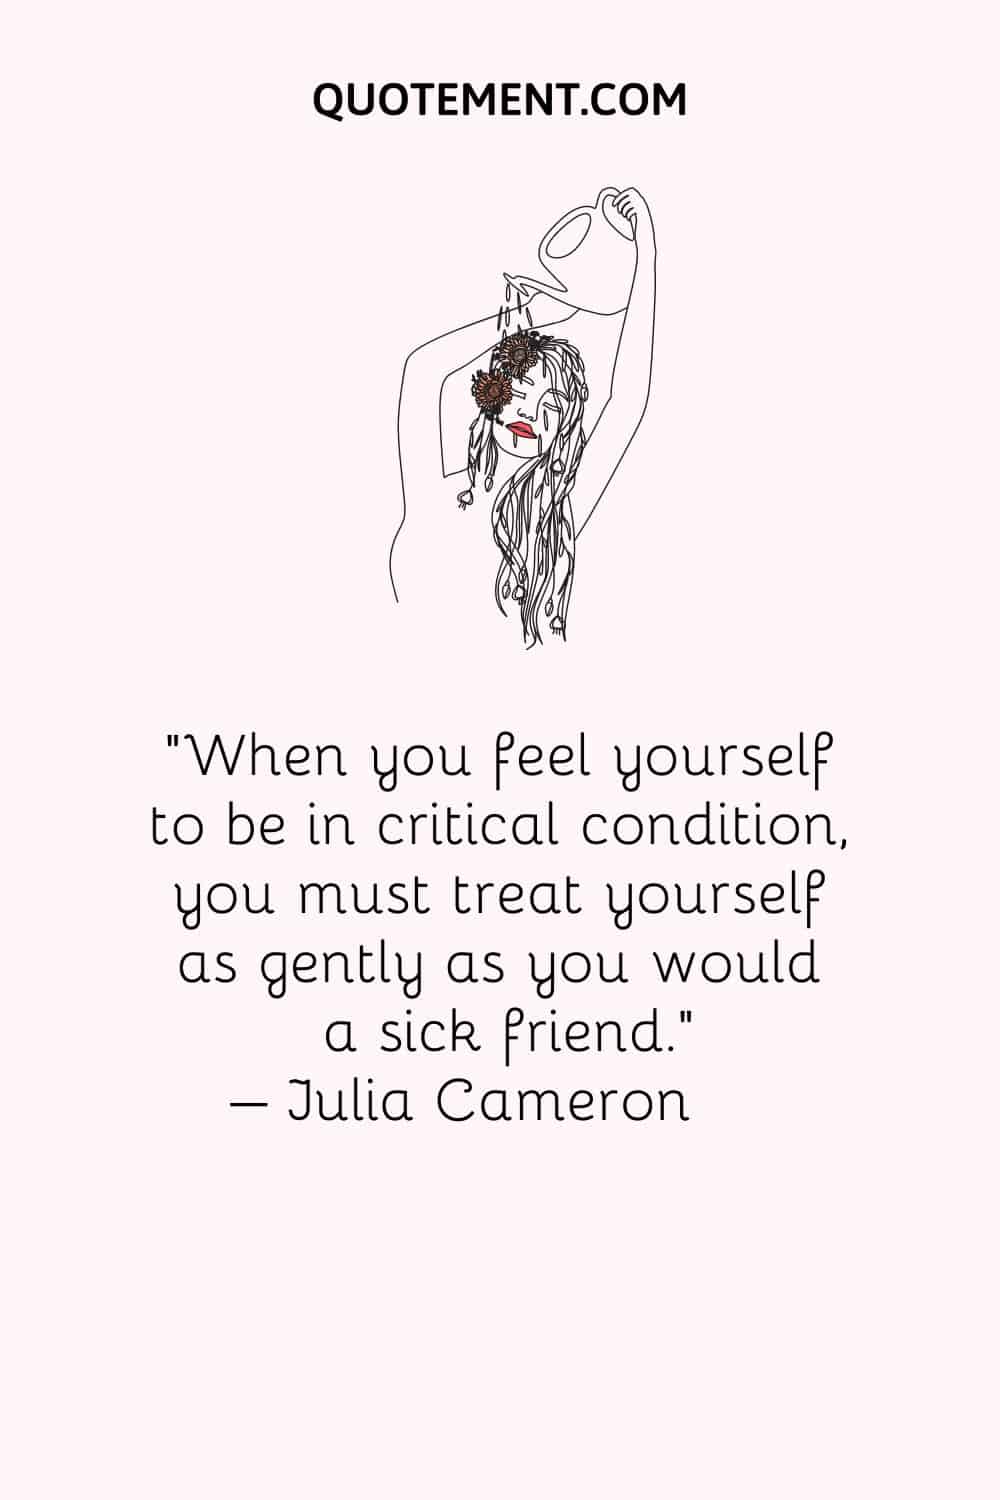 When you feel yourself to be in critical condition, you must treat yourself as gently as you would a sick friend